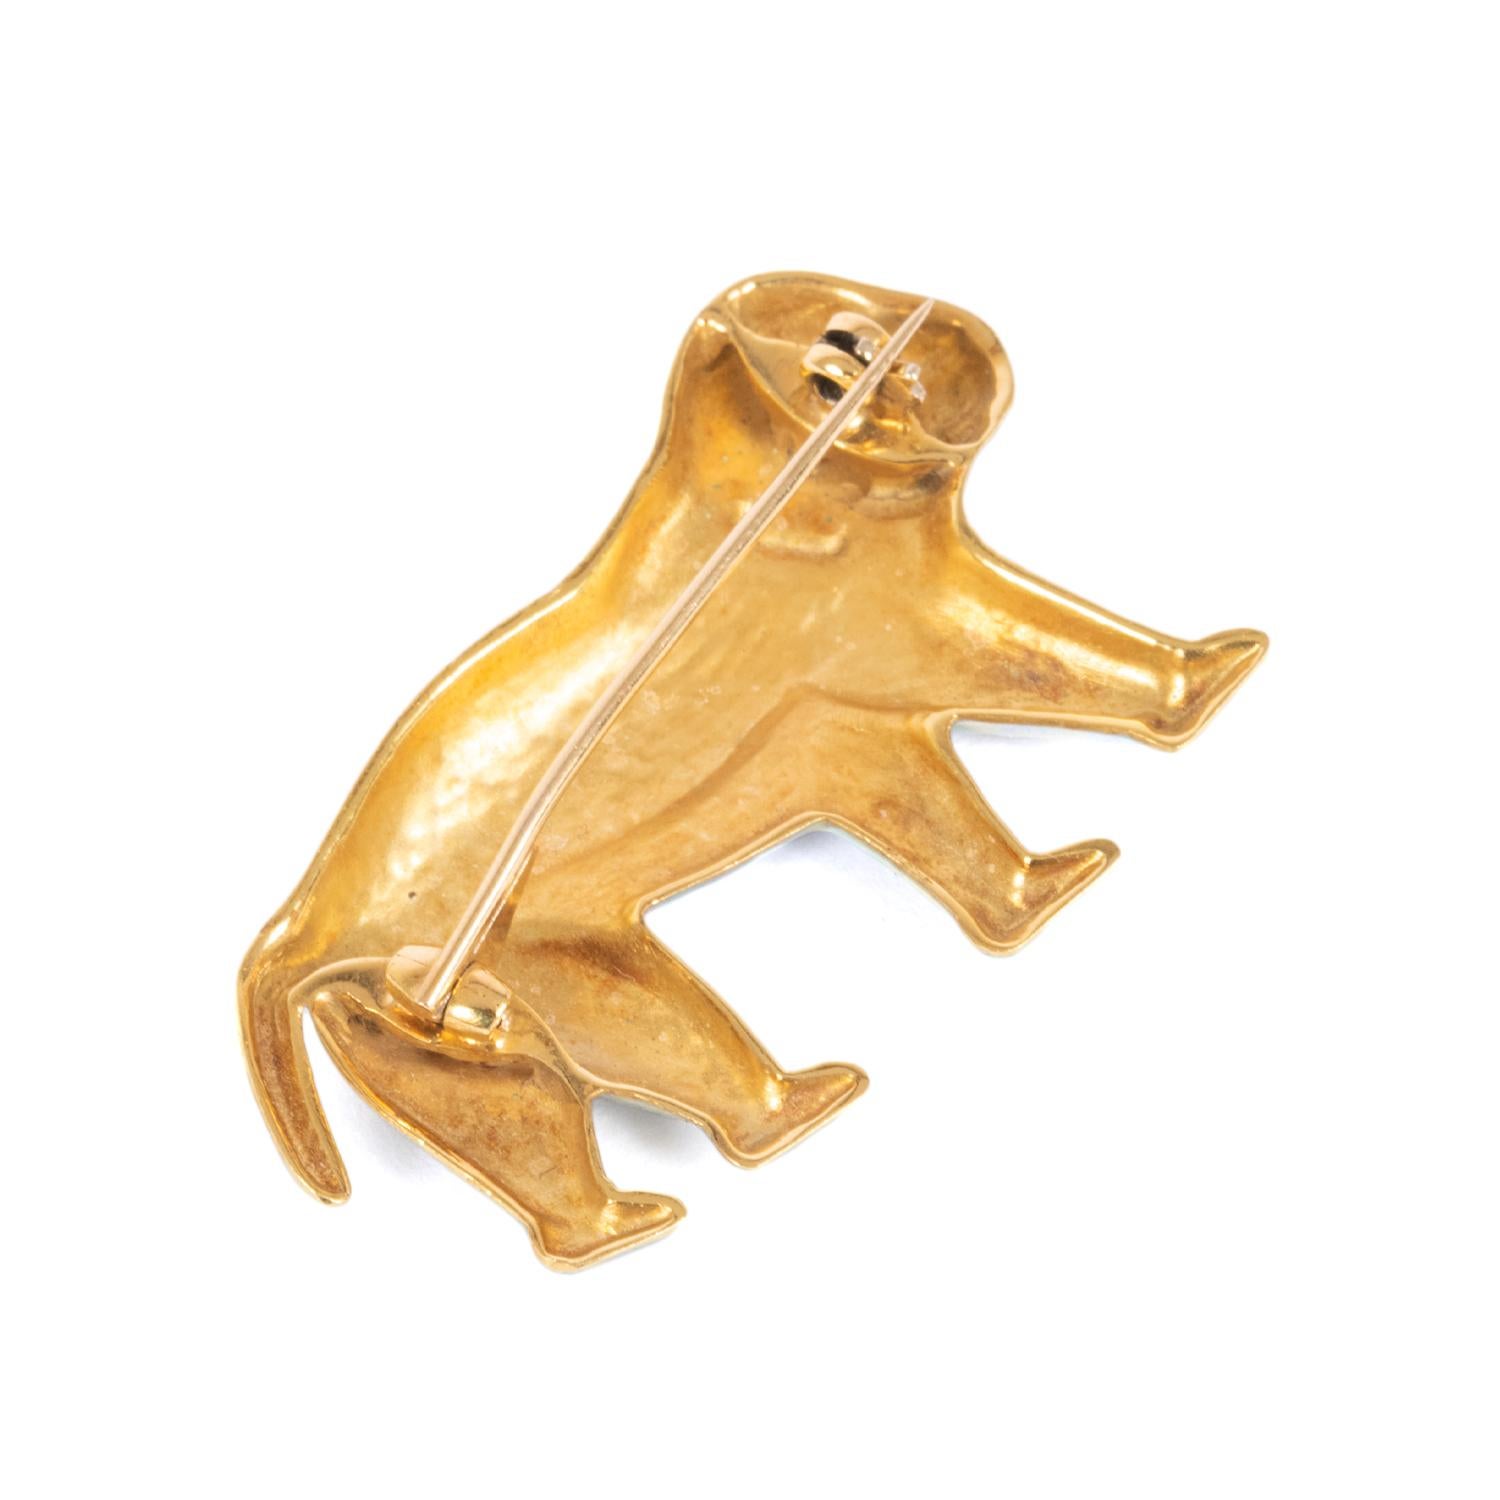 Giancarlo Montebello 18 K Gold Light Blue Enamel Monkey Brooch In New Condition For Sale In Bari, IT